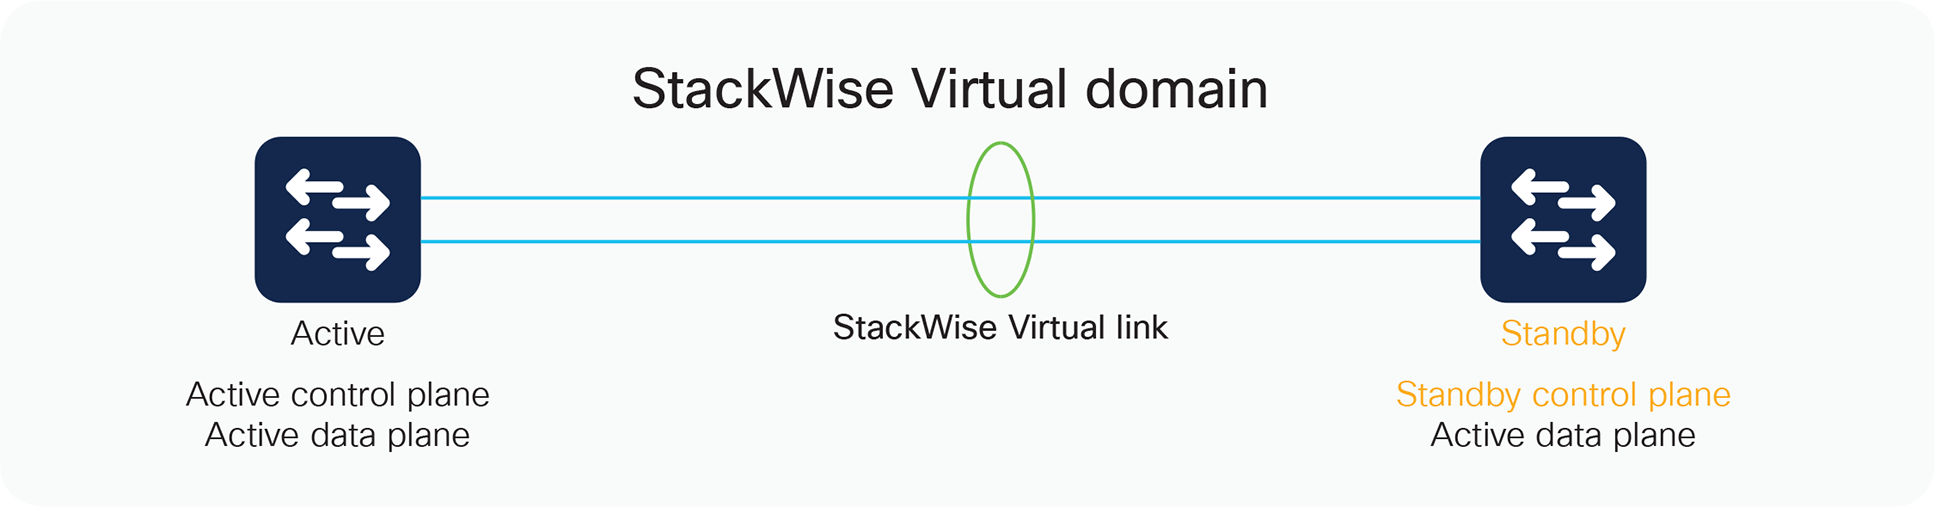 Components of StackWise Virtual